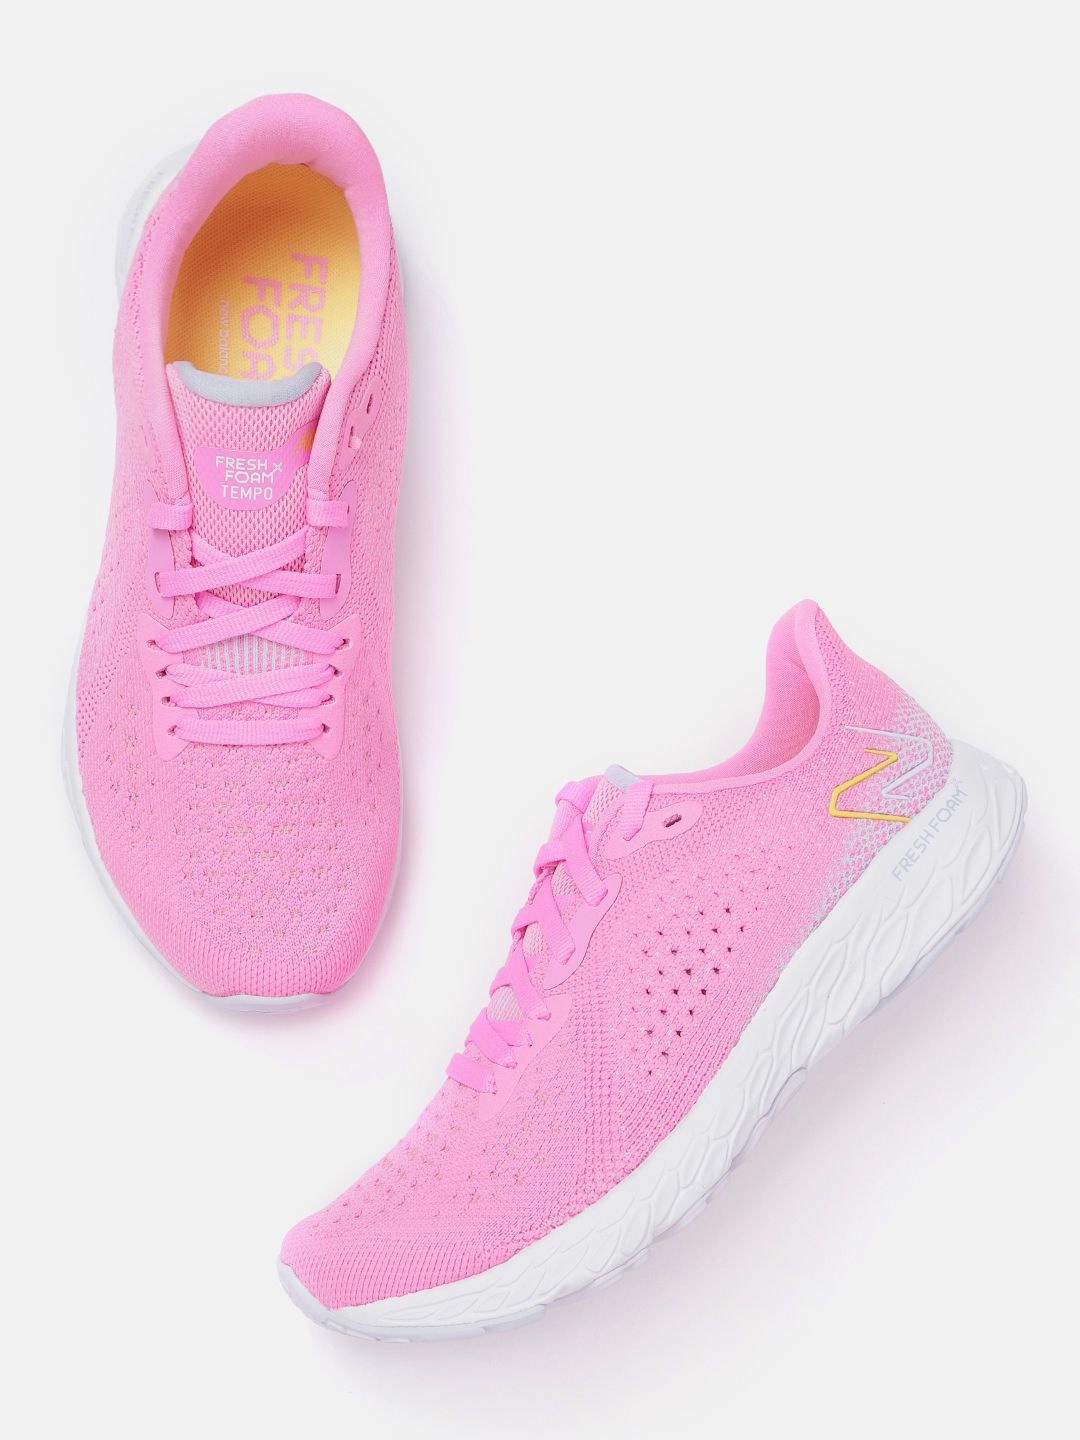 New Balance Women Pink Woven Design Tempo Running Shoes Price in India